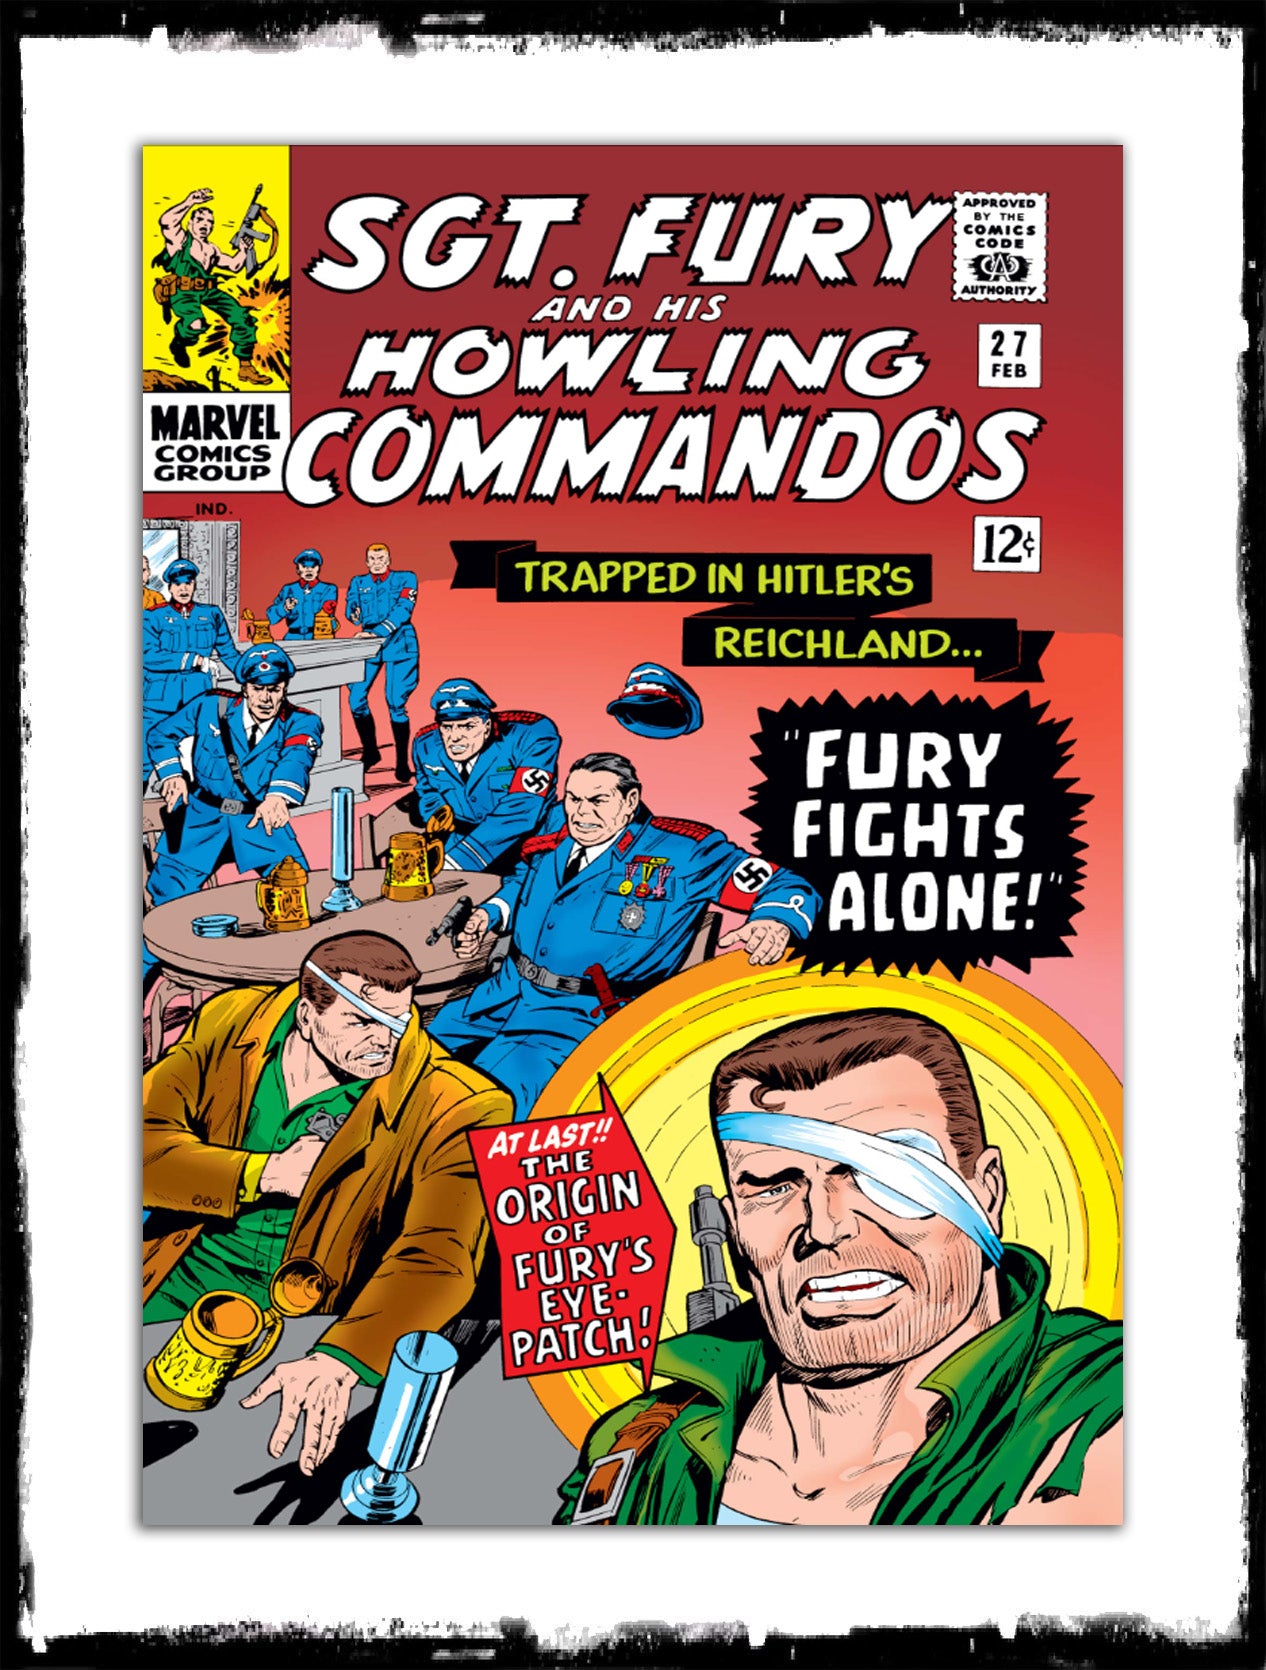 SGT. FURY AND THE HOWLING COMMANDOS - #27 ORIGIN OF FURY'S EYE-PATCH (1966 - VF+)